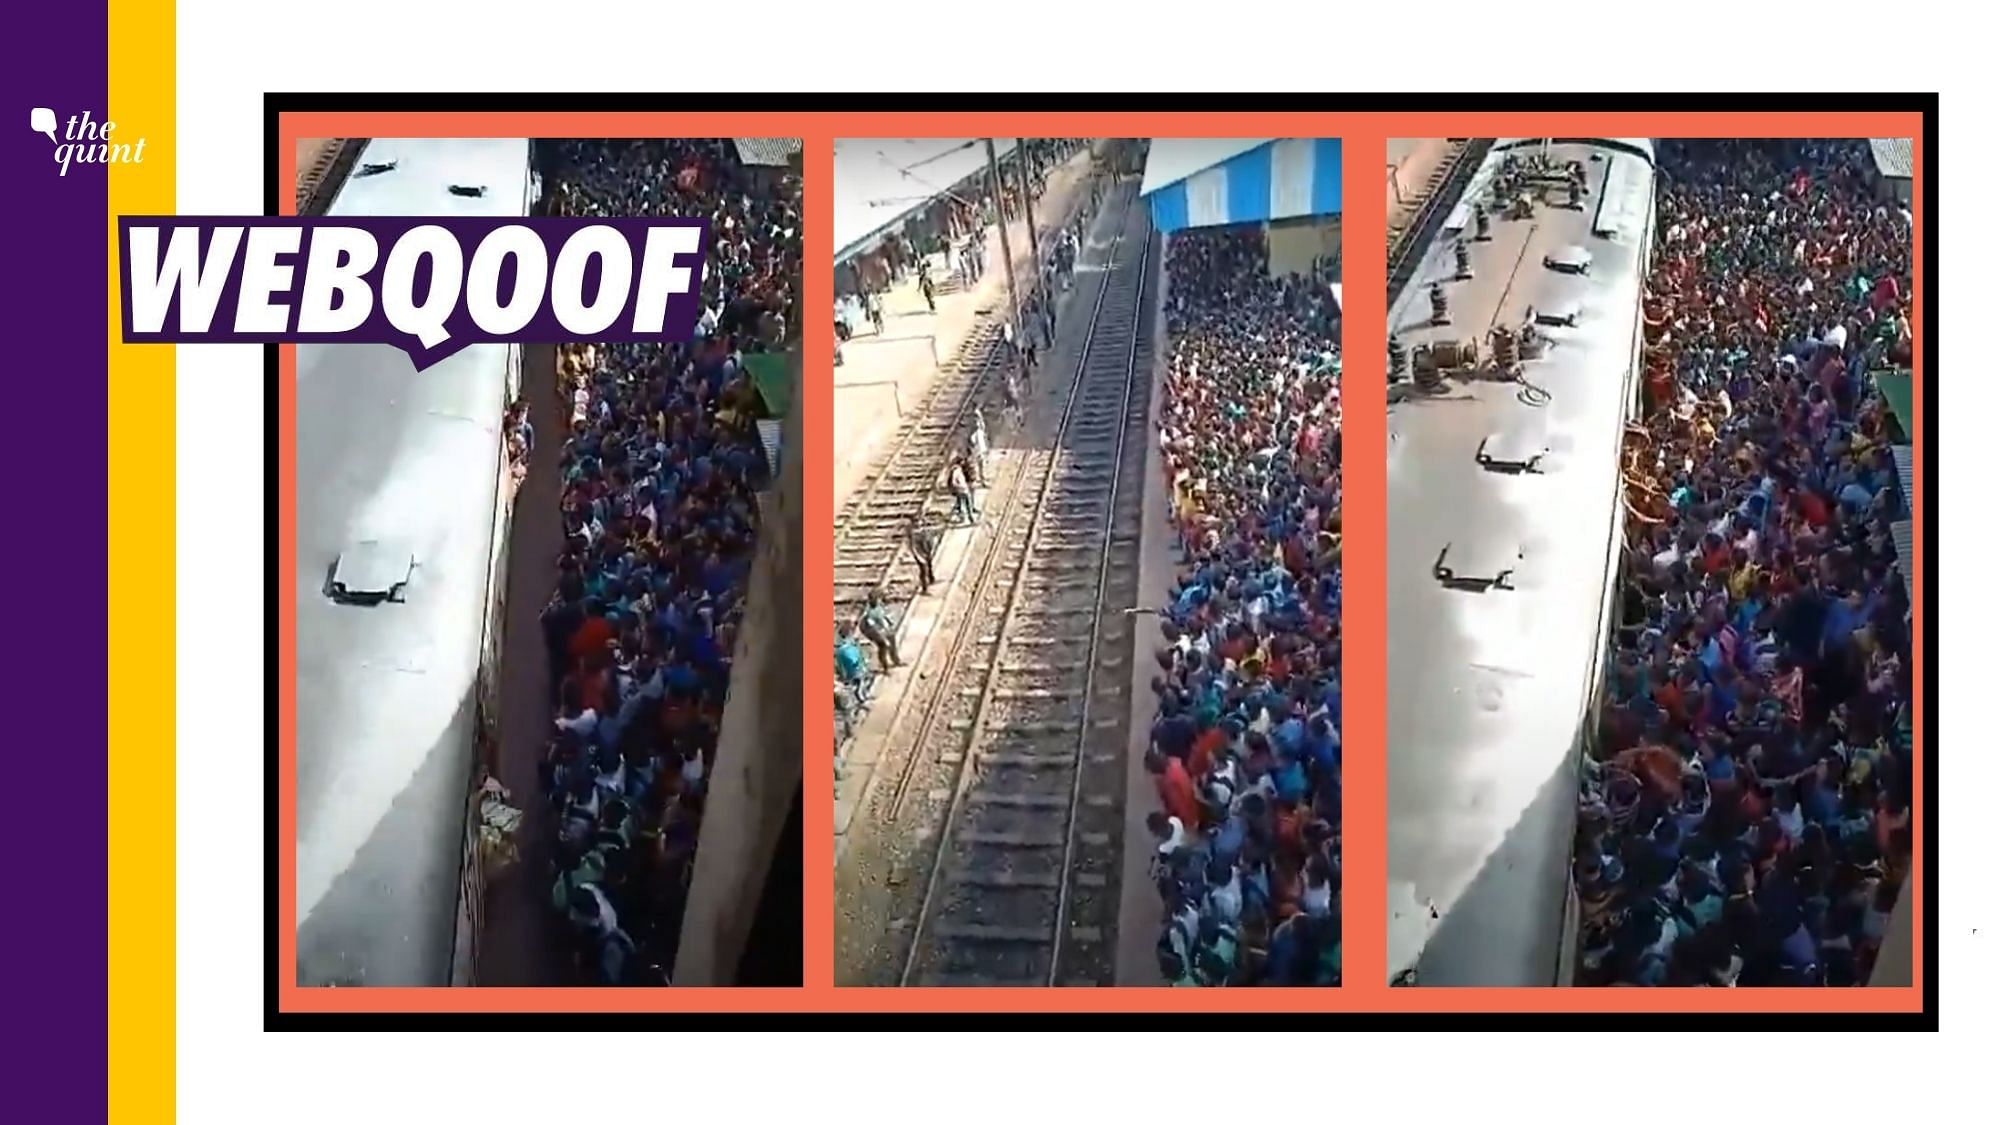 Fact-Check on Kolkata Station Video: An old video from 2018 was shared with a false claim that it showed a huge number of people boarding a train in Kolkata during the coronavirus pandemic.